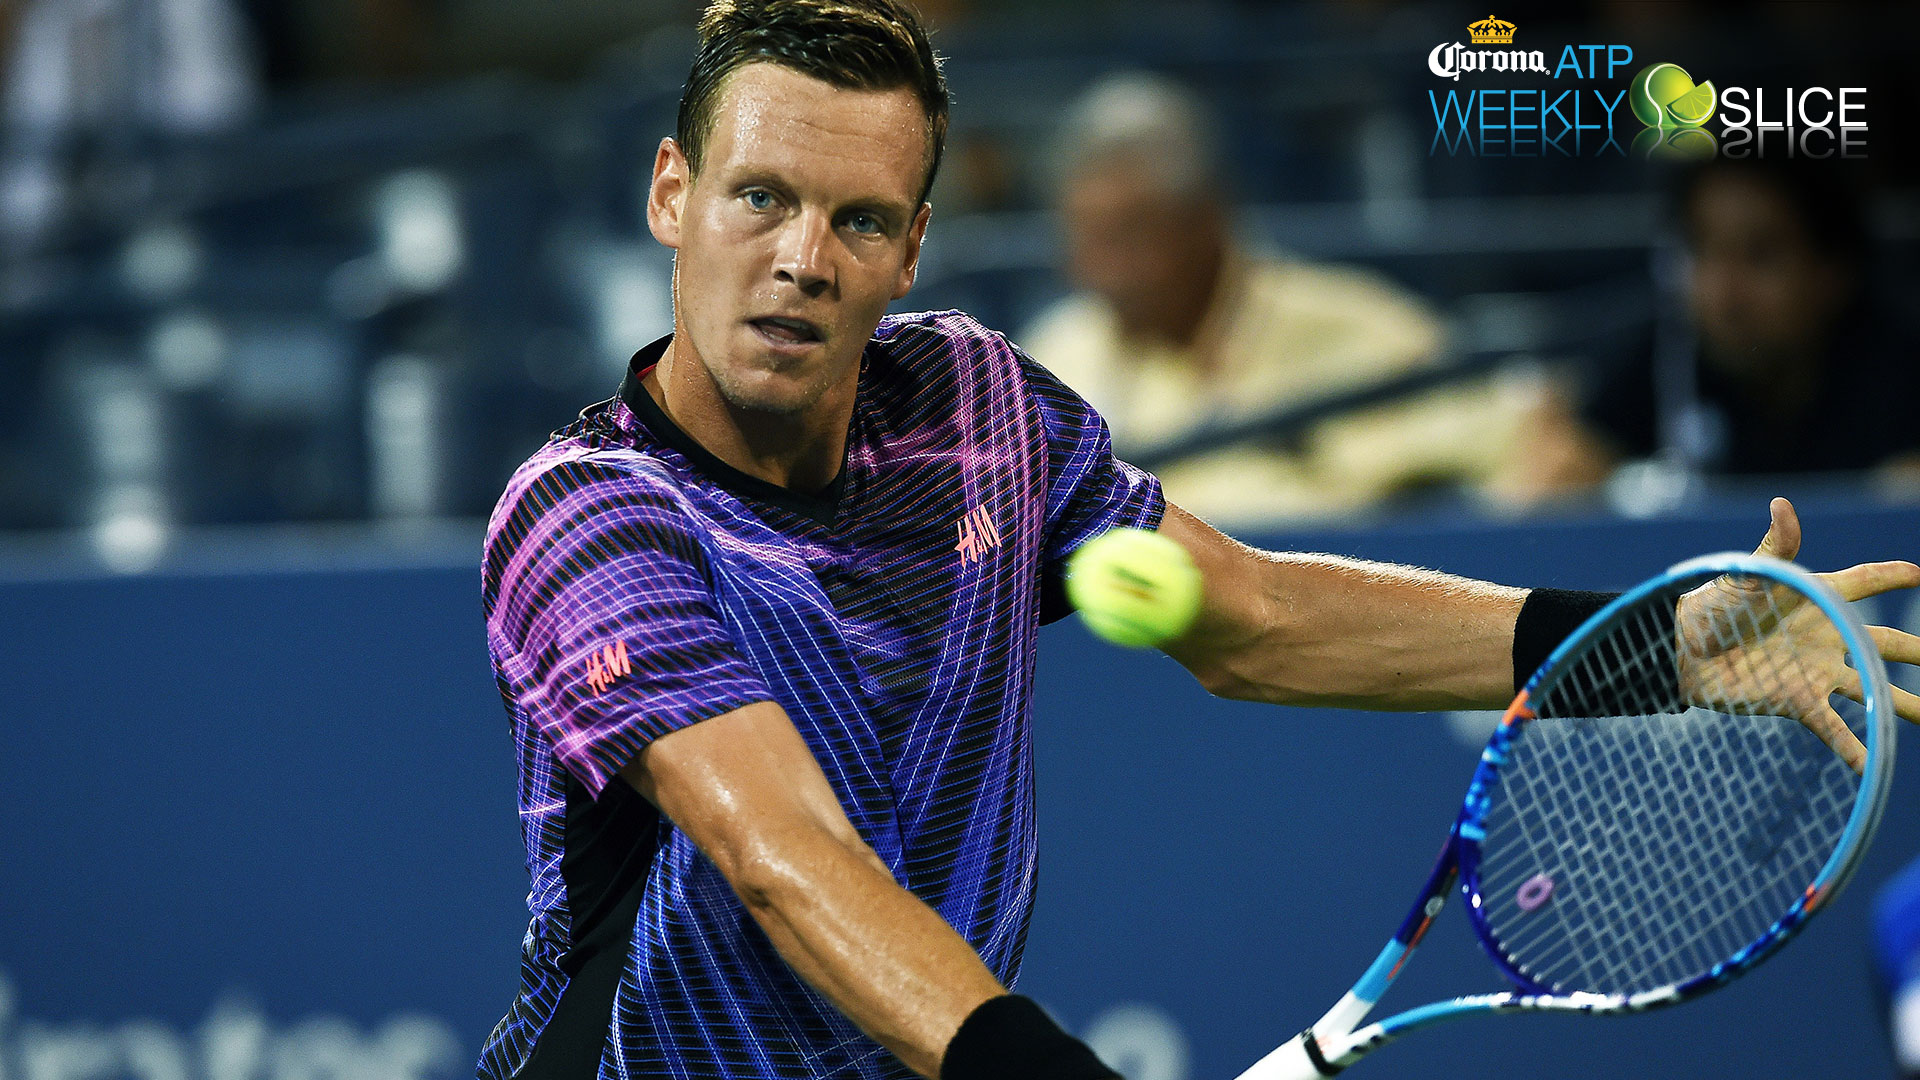 Berdych Hunting For Finals Berth In St. Petersburg